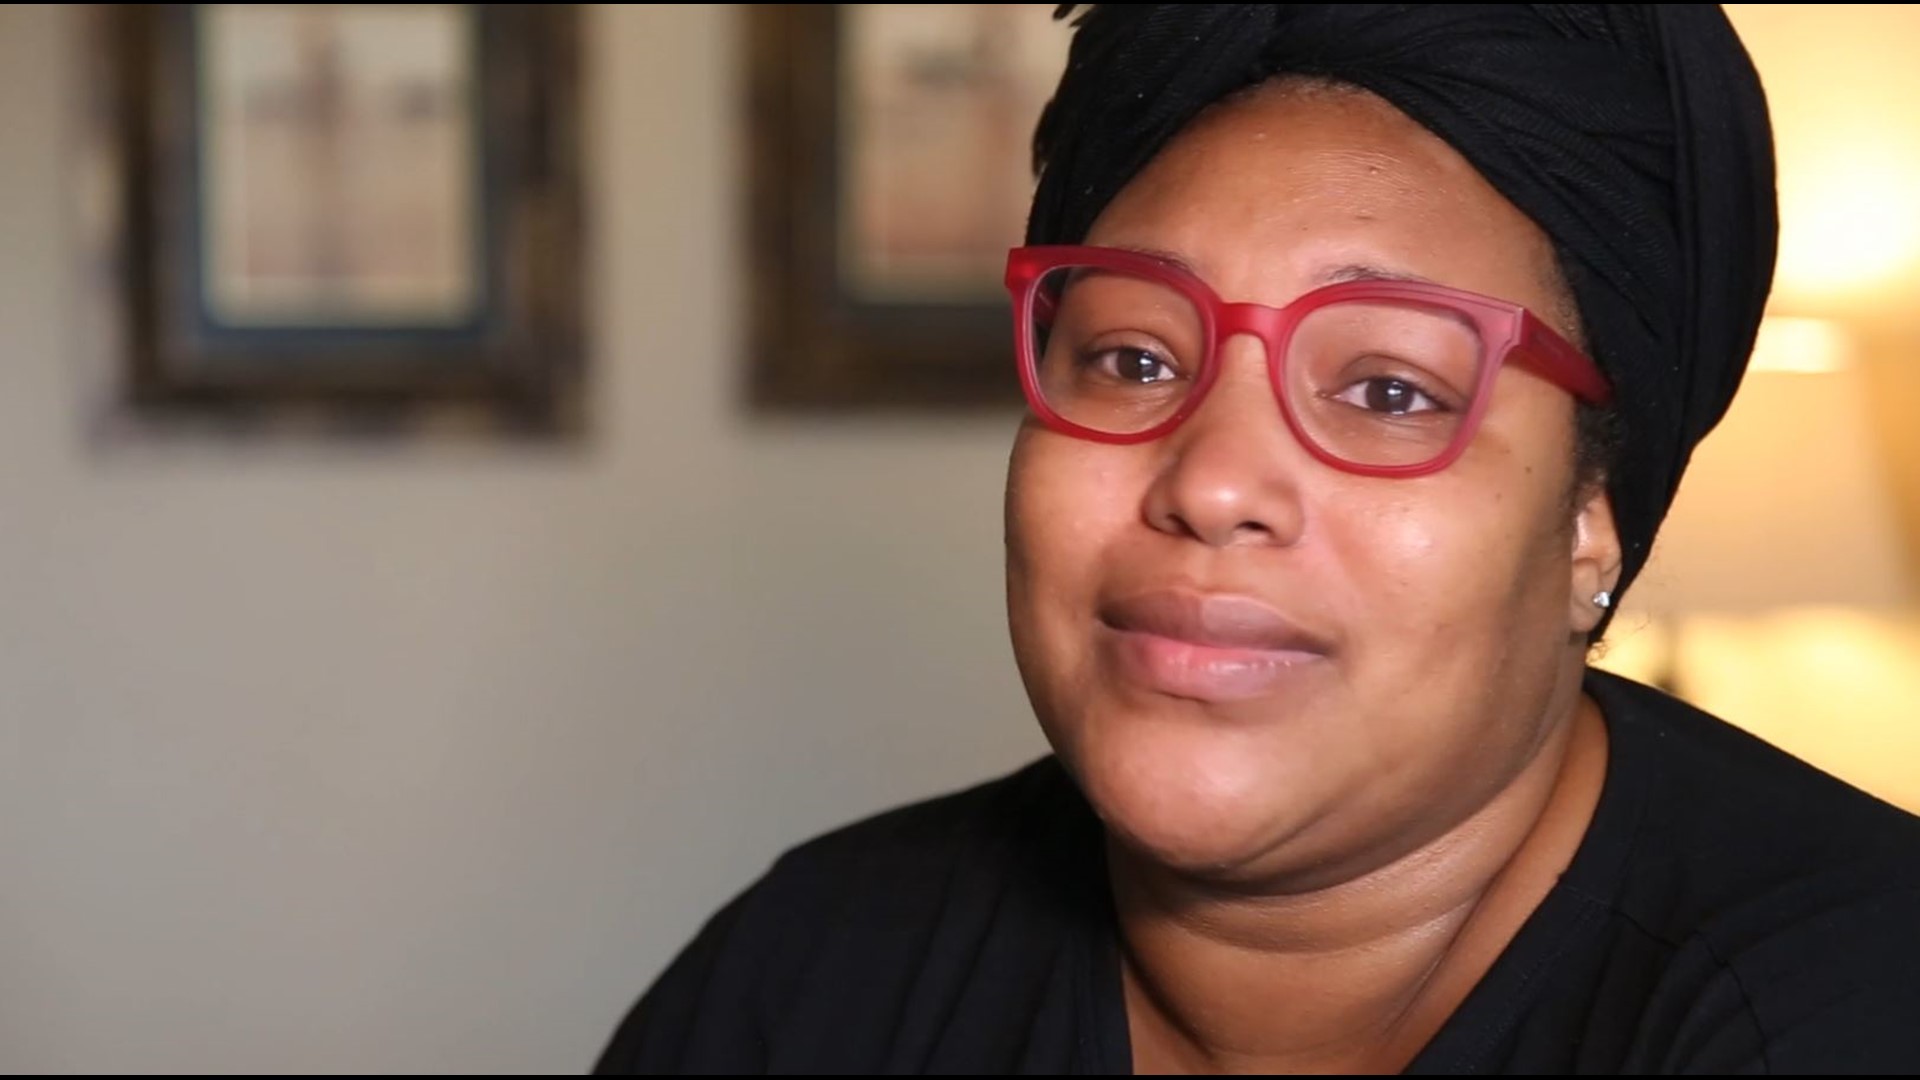 Felicia Melton, a single mother of three, hit rock bottom at the start of the pandemic. She credits Interfaith Family Services for transforming her life.